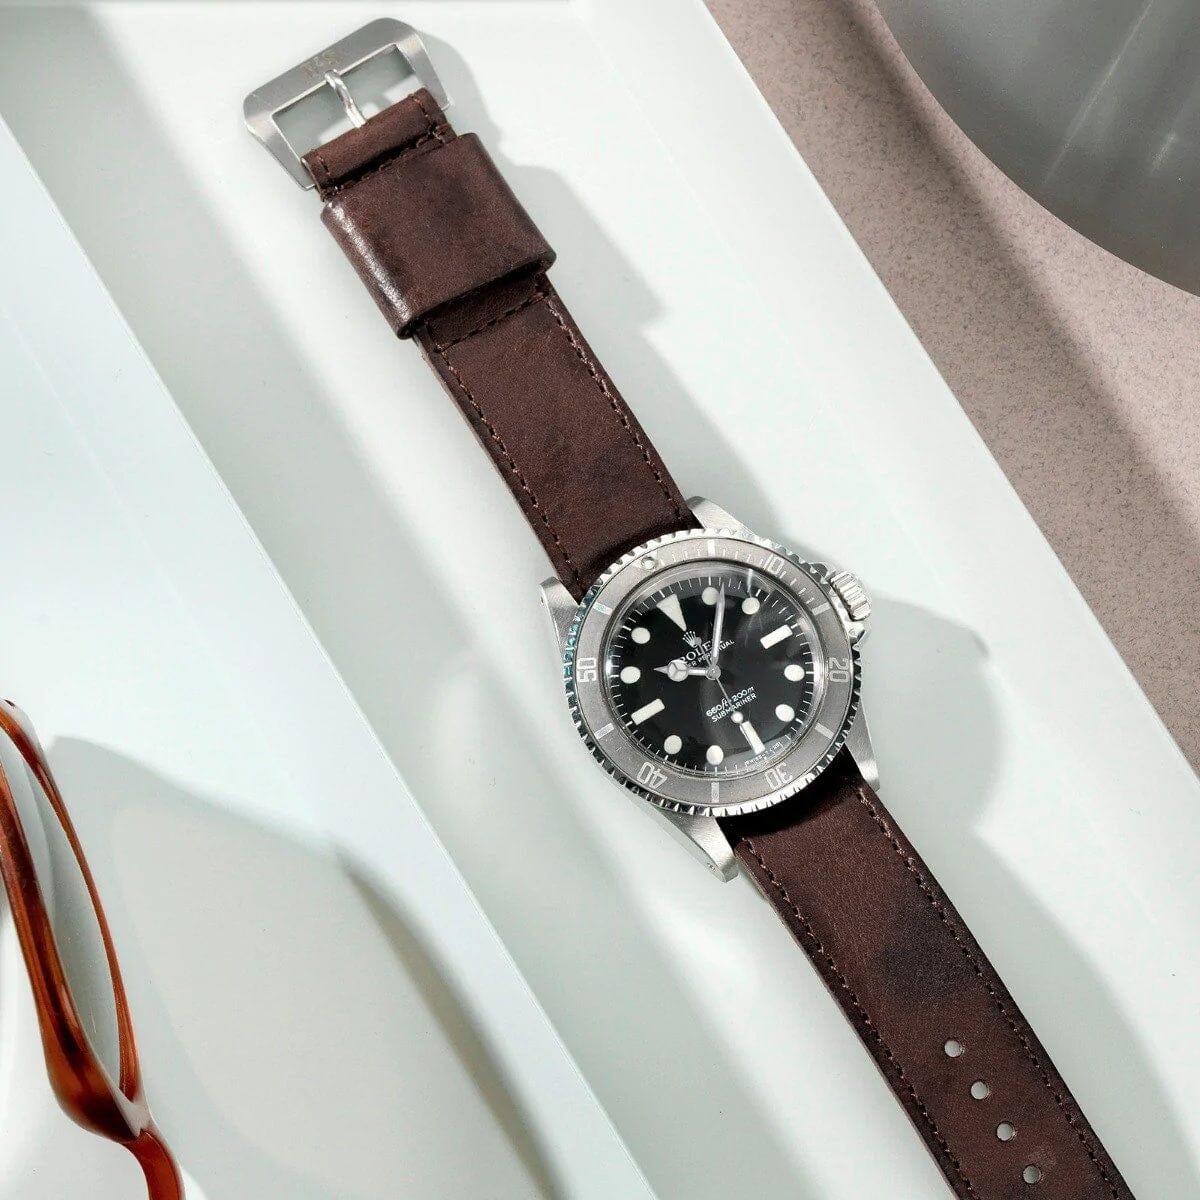 One Piece Nato Brown Lumberjack Leather Watch Strap